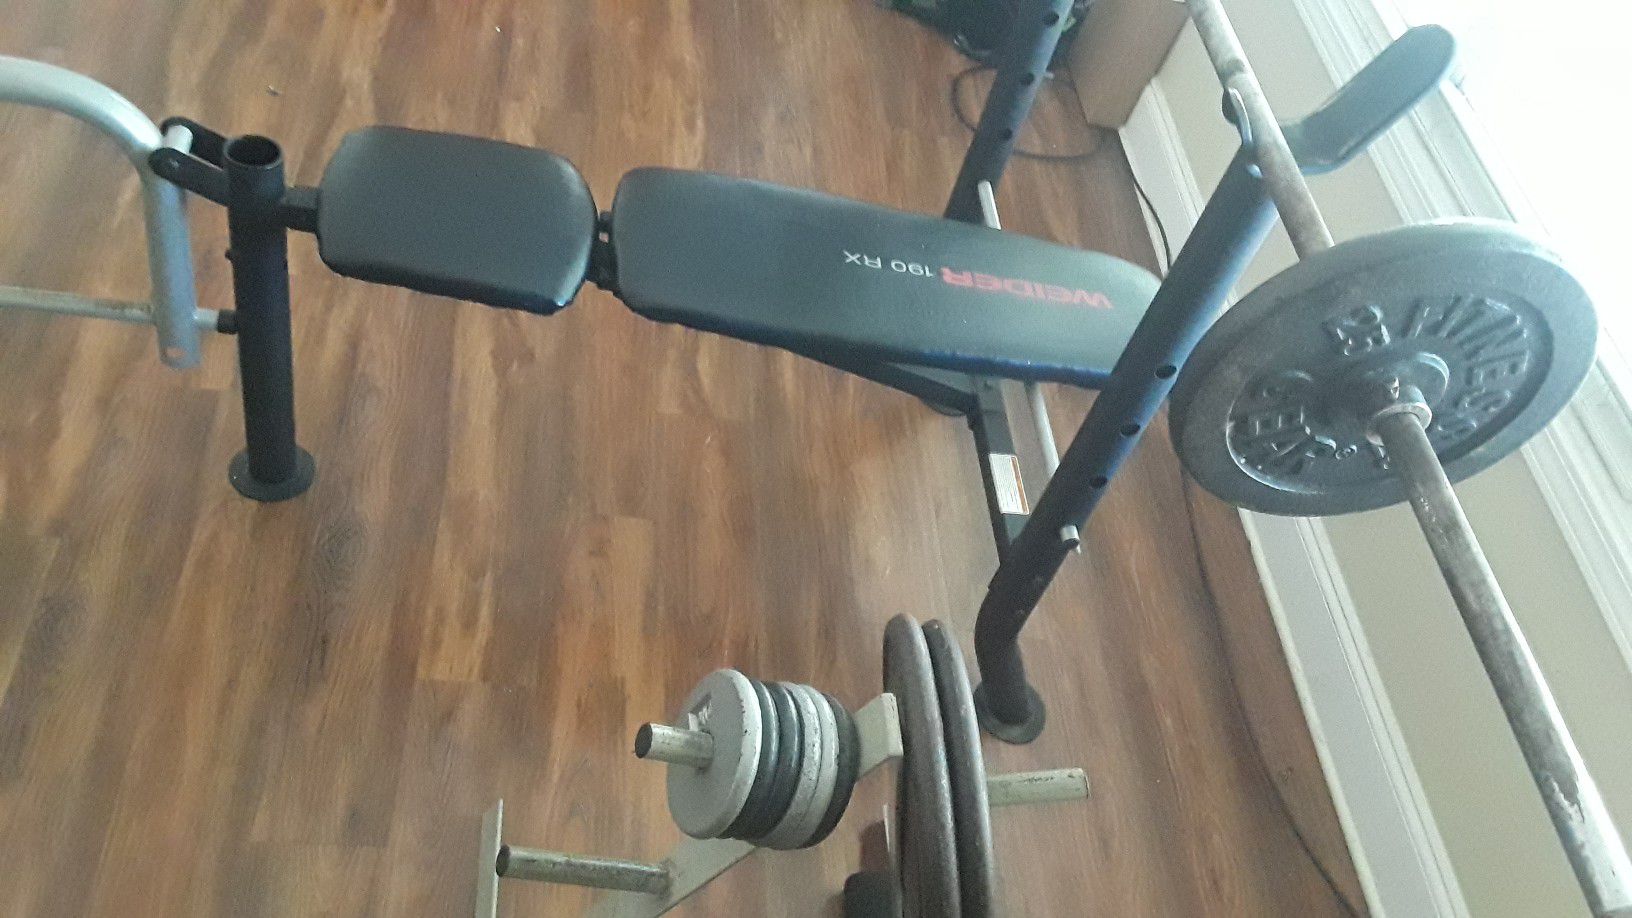 BENCH AND WEIGHTS